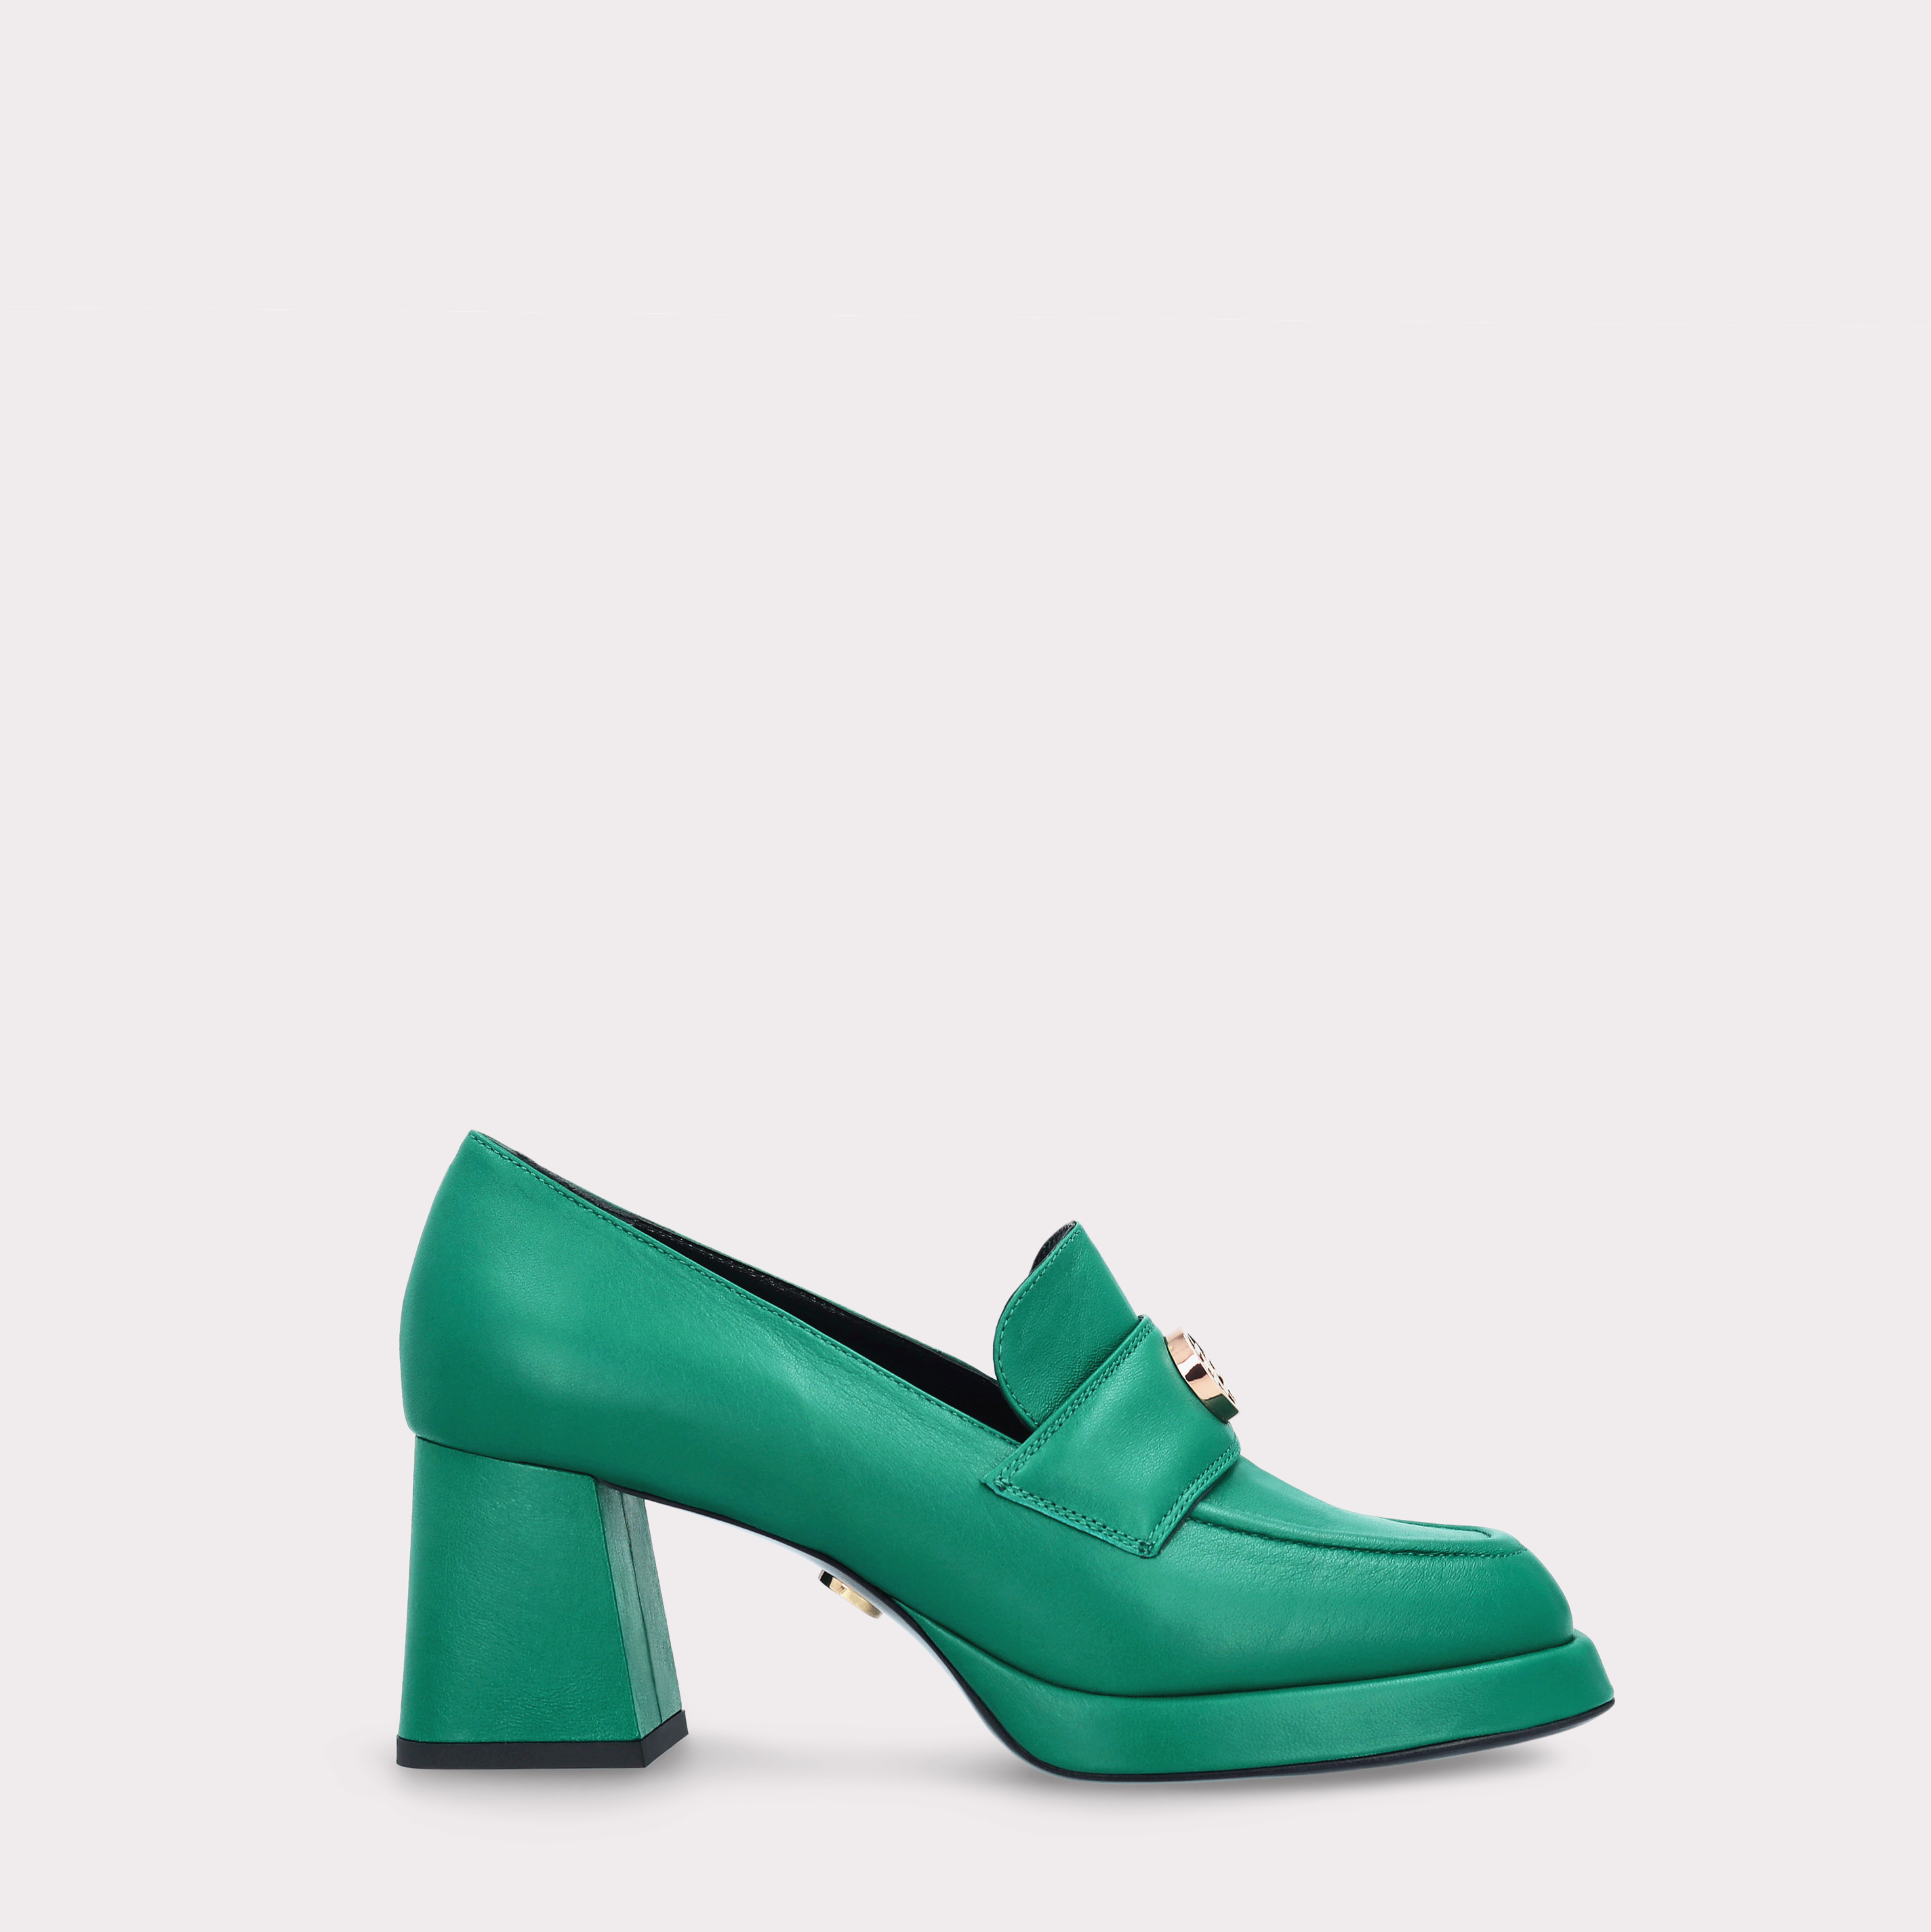 CONNIE MOK GREEN SMOOTH LEATHER PLATFORM PUMPS